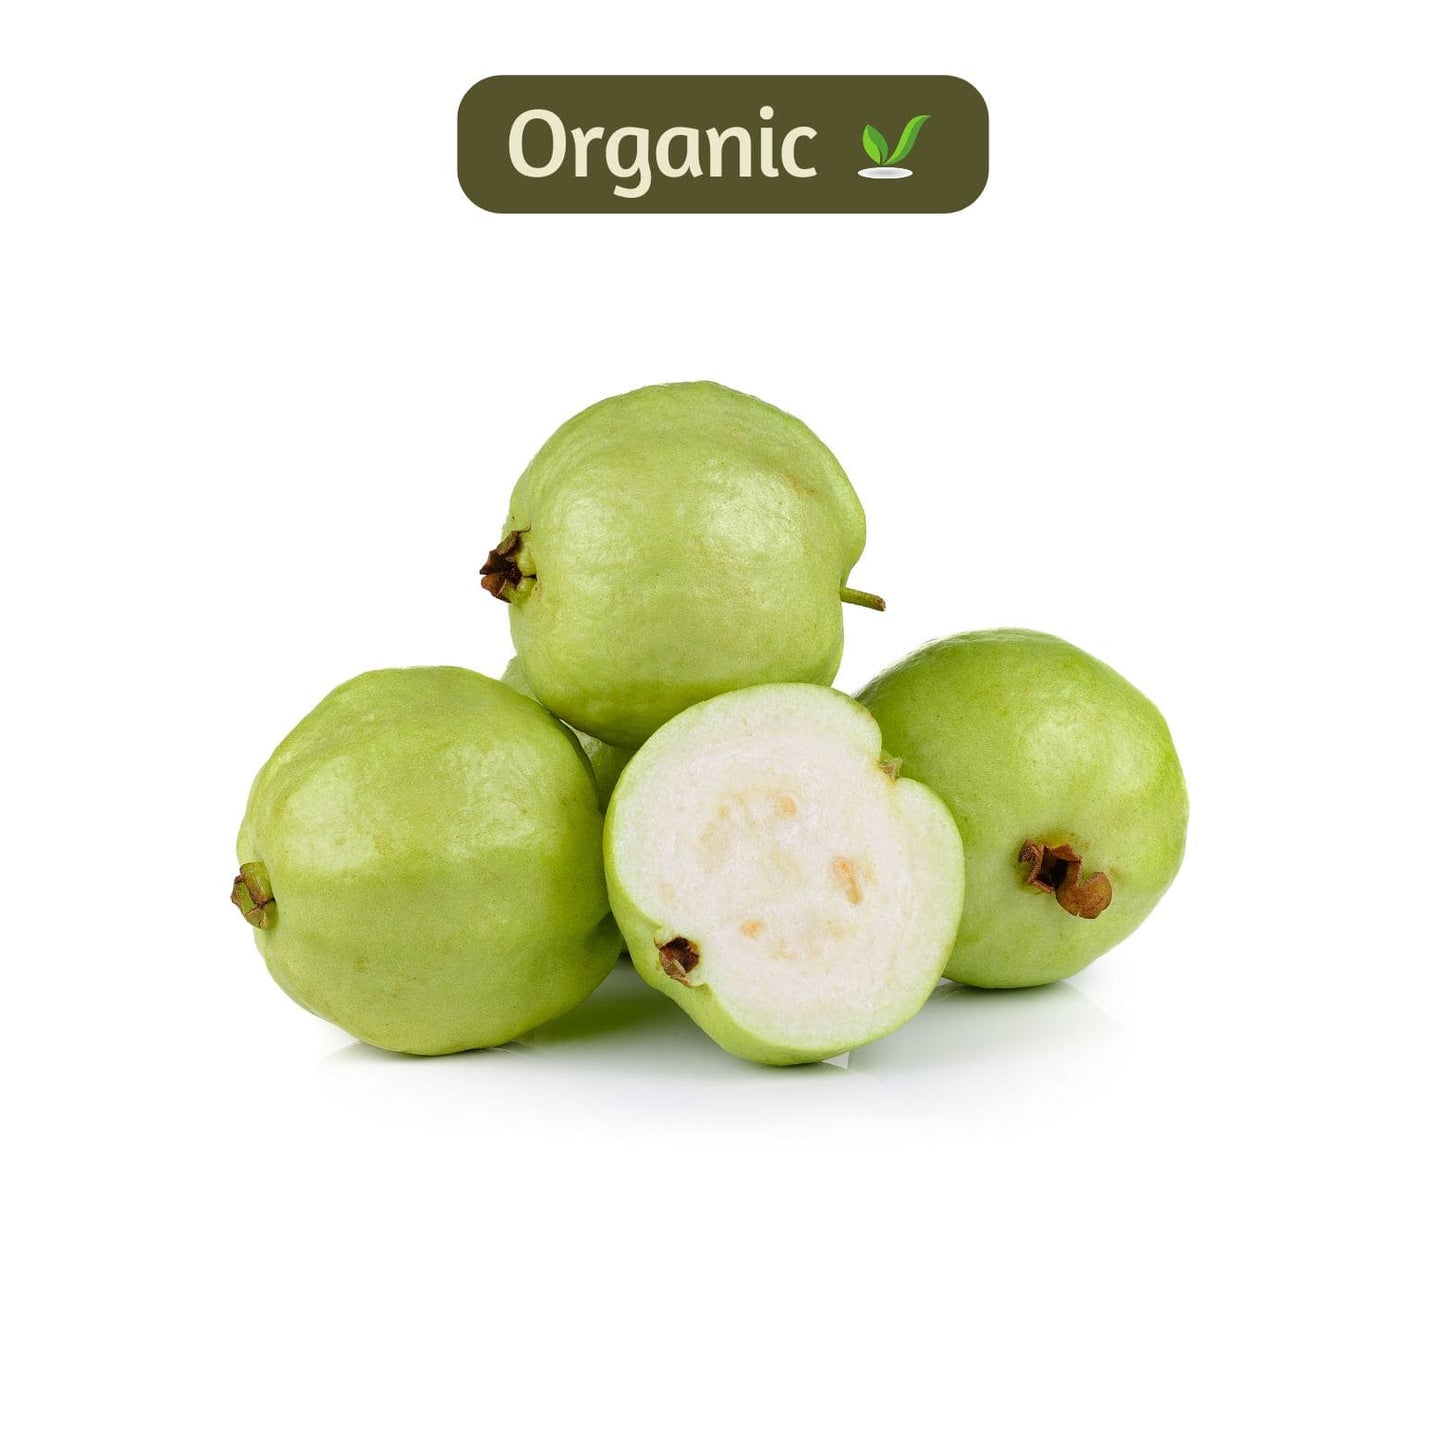 organic White Guava - Online store for organic products in Bangalore - Fruits |